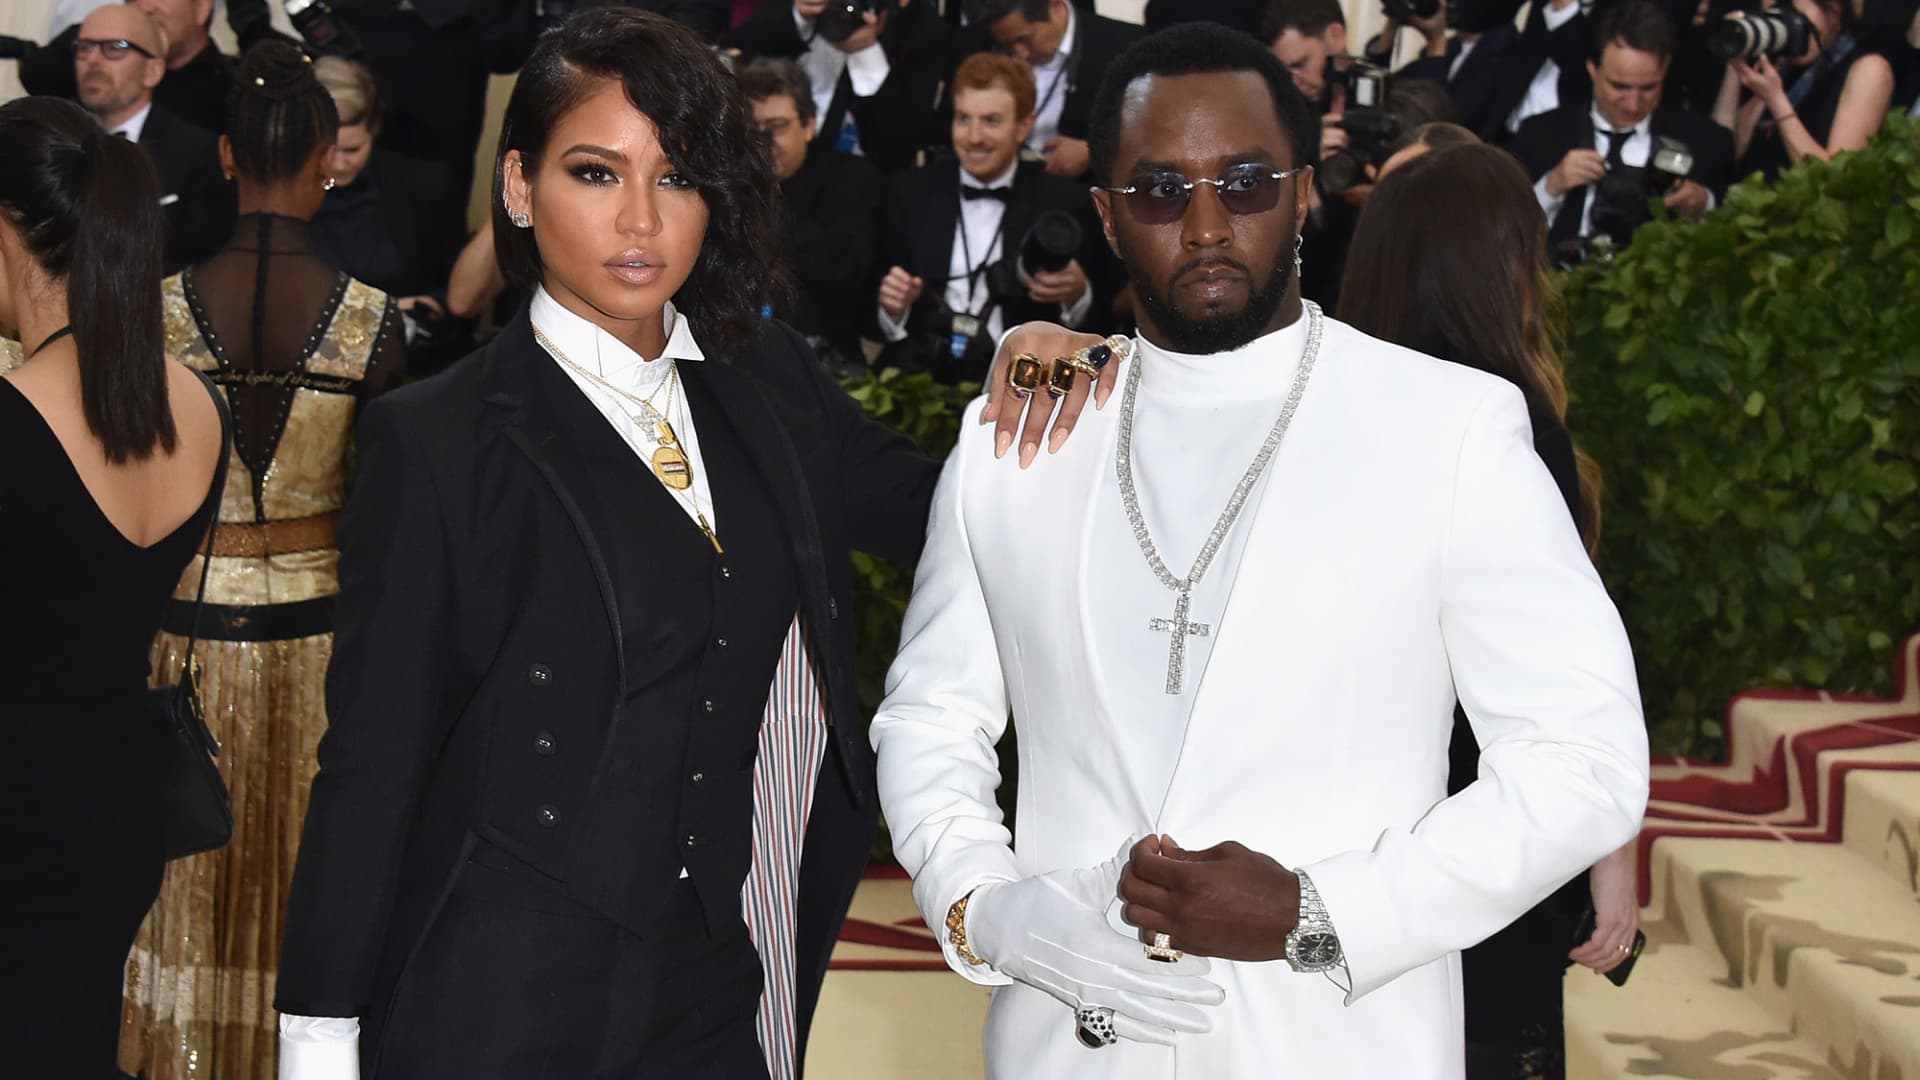 Cassie Ventura and Sean 'Diddy' Combs attend the Heavenly Bodies: Fashion & The Catholic Imagination Costume Institute Gala at The Metropolitan Museum of Art on May 7, 2018 in New York City.